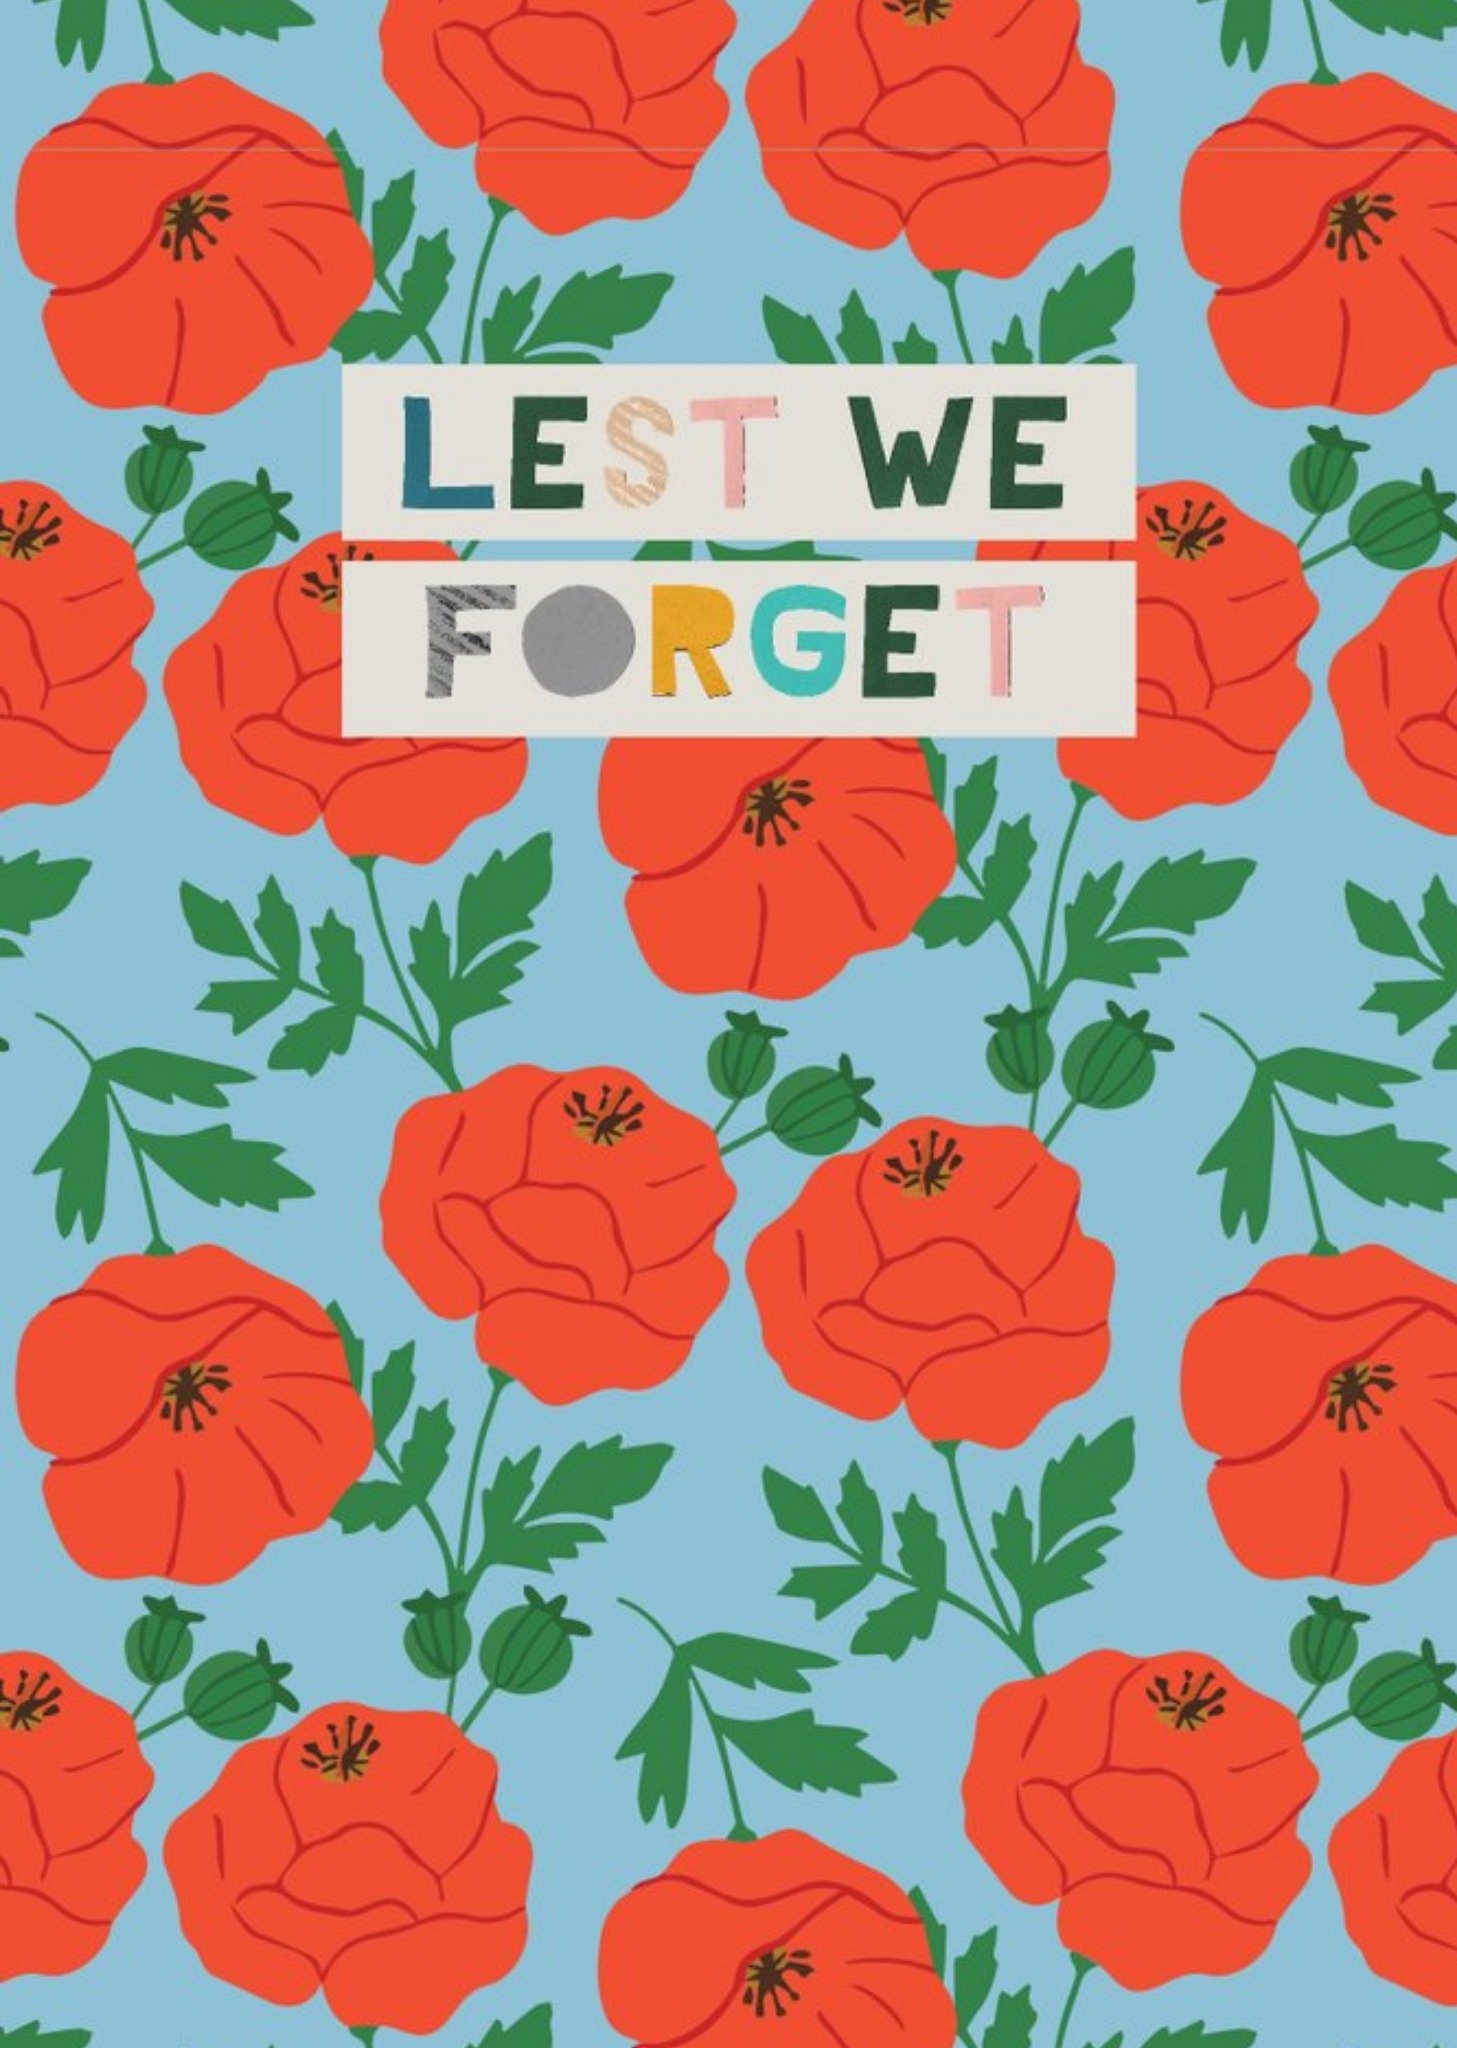 Moonpig Bright Colourful Red Poppies Illustration Lest We Forget Card, Large